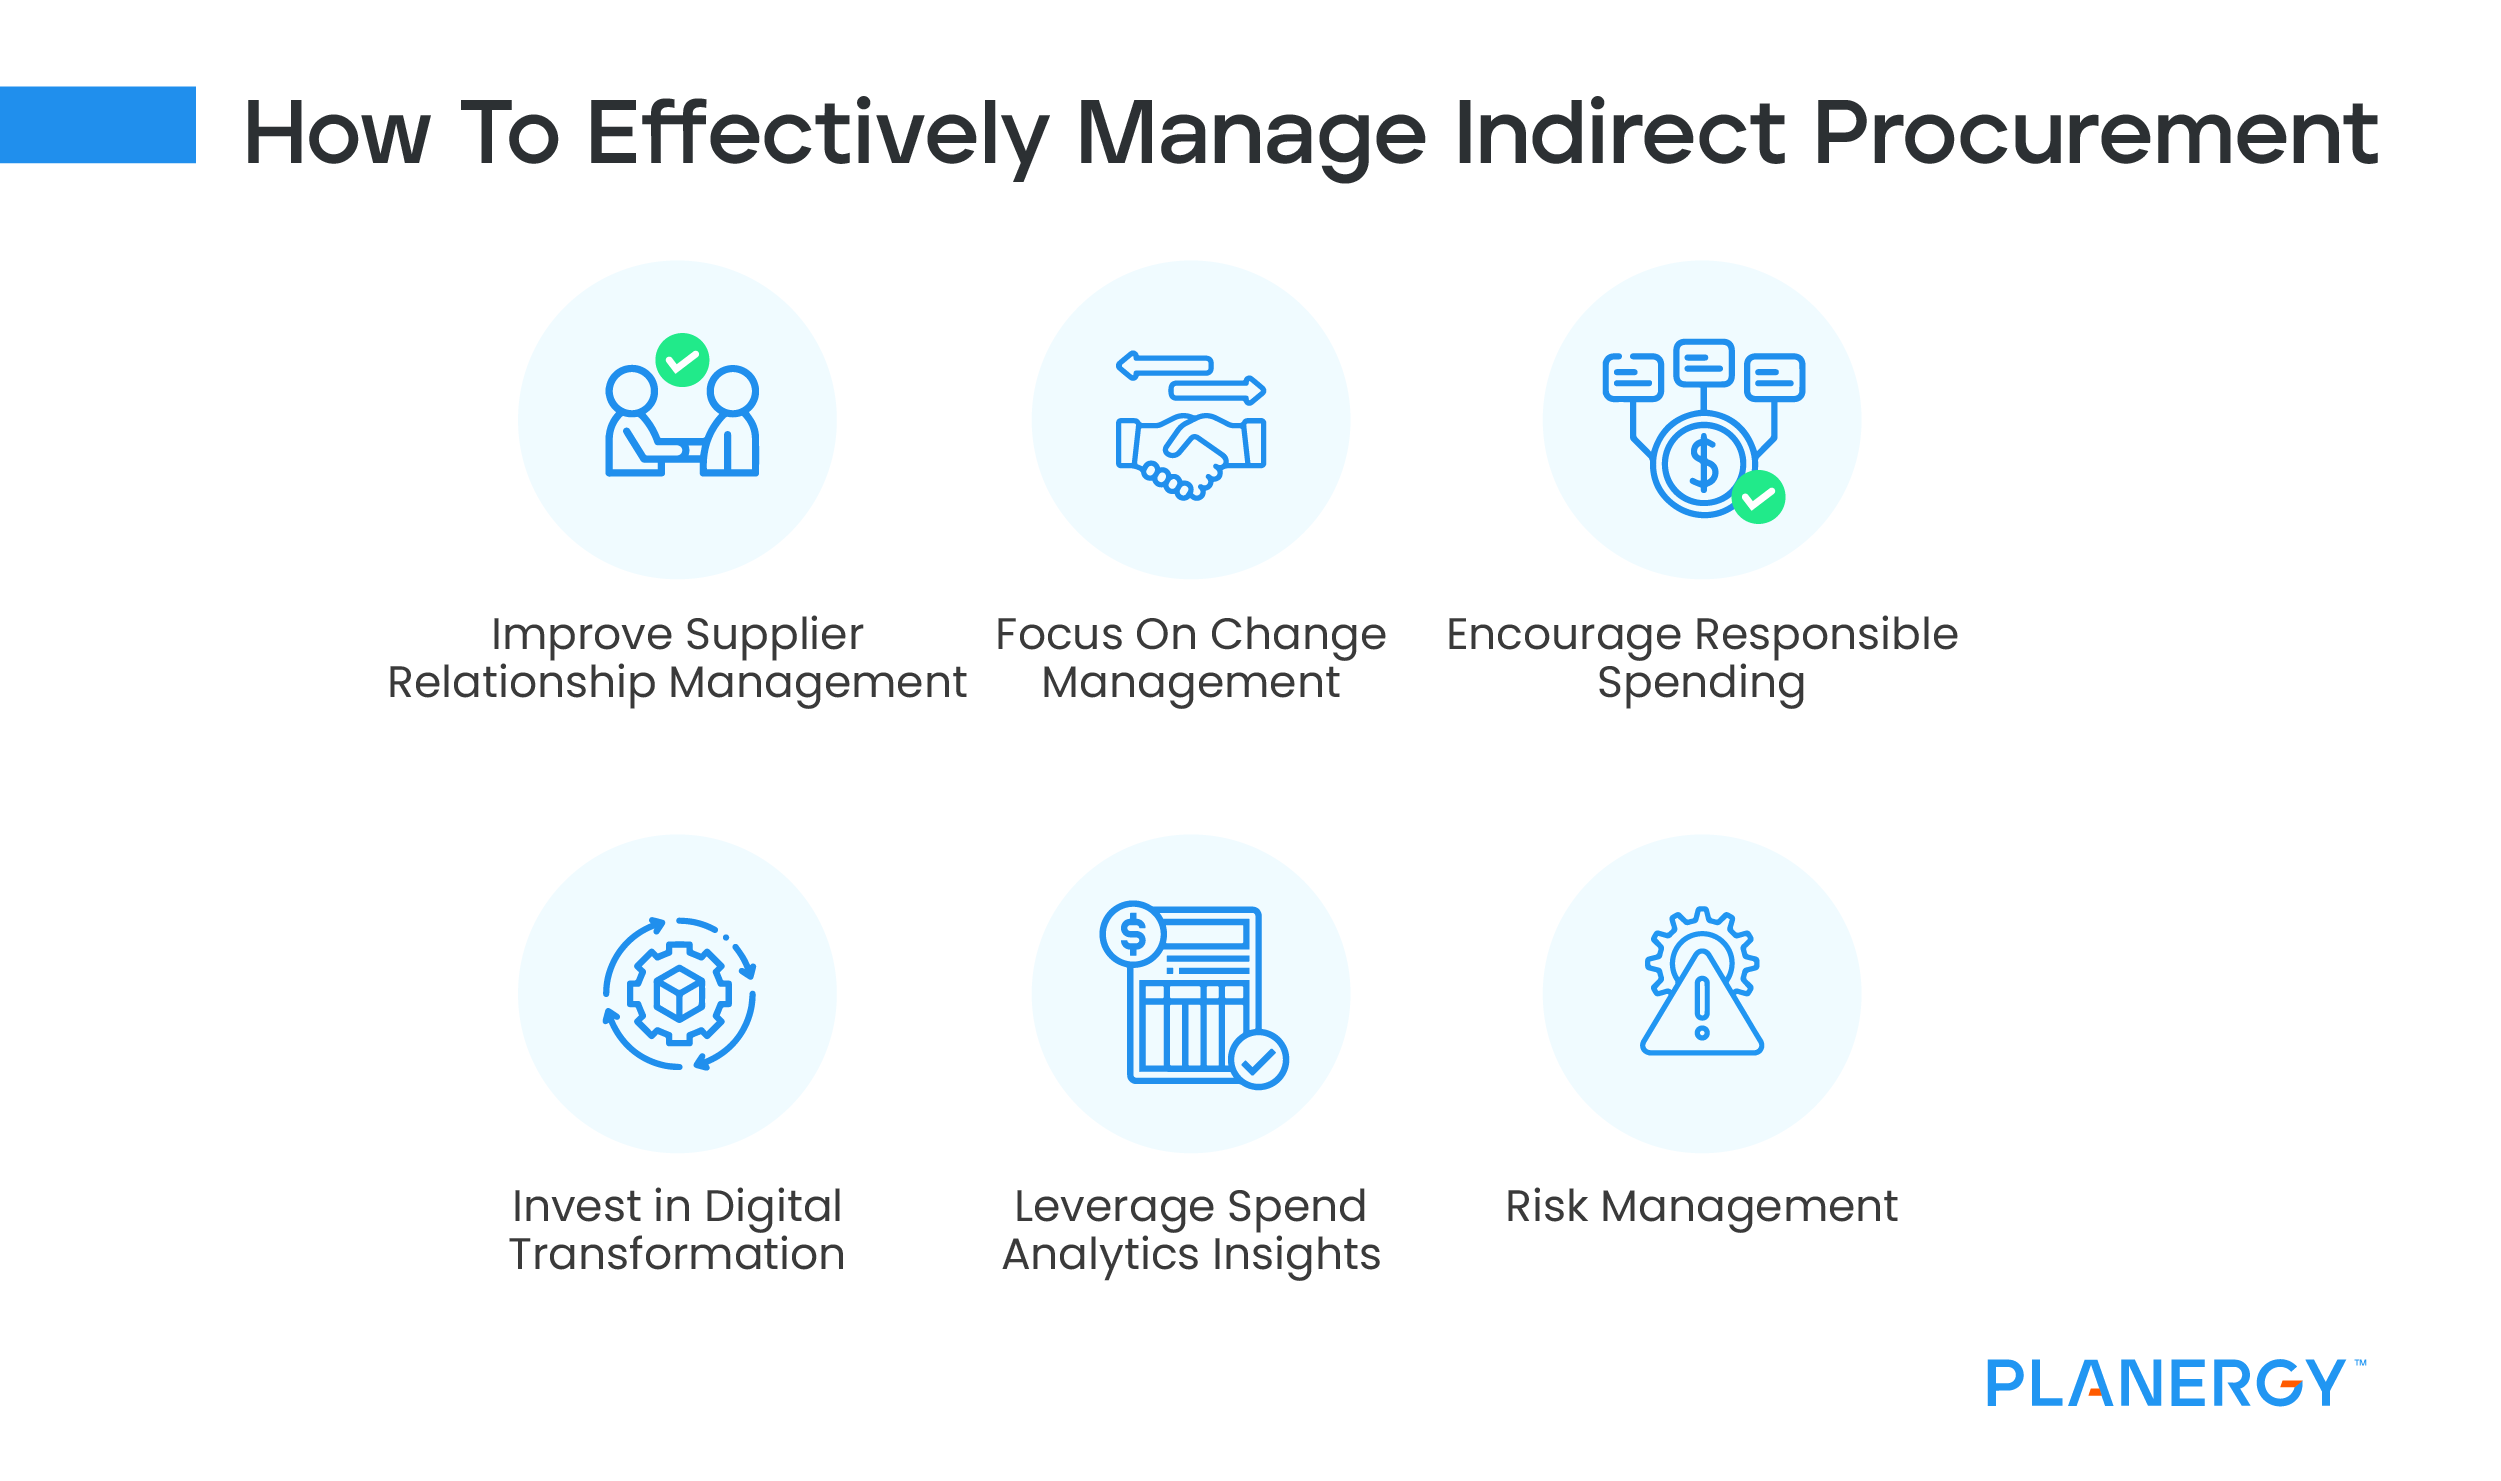 How to Effectively Manage Indirect Procurement